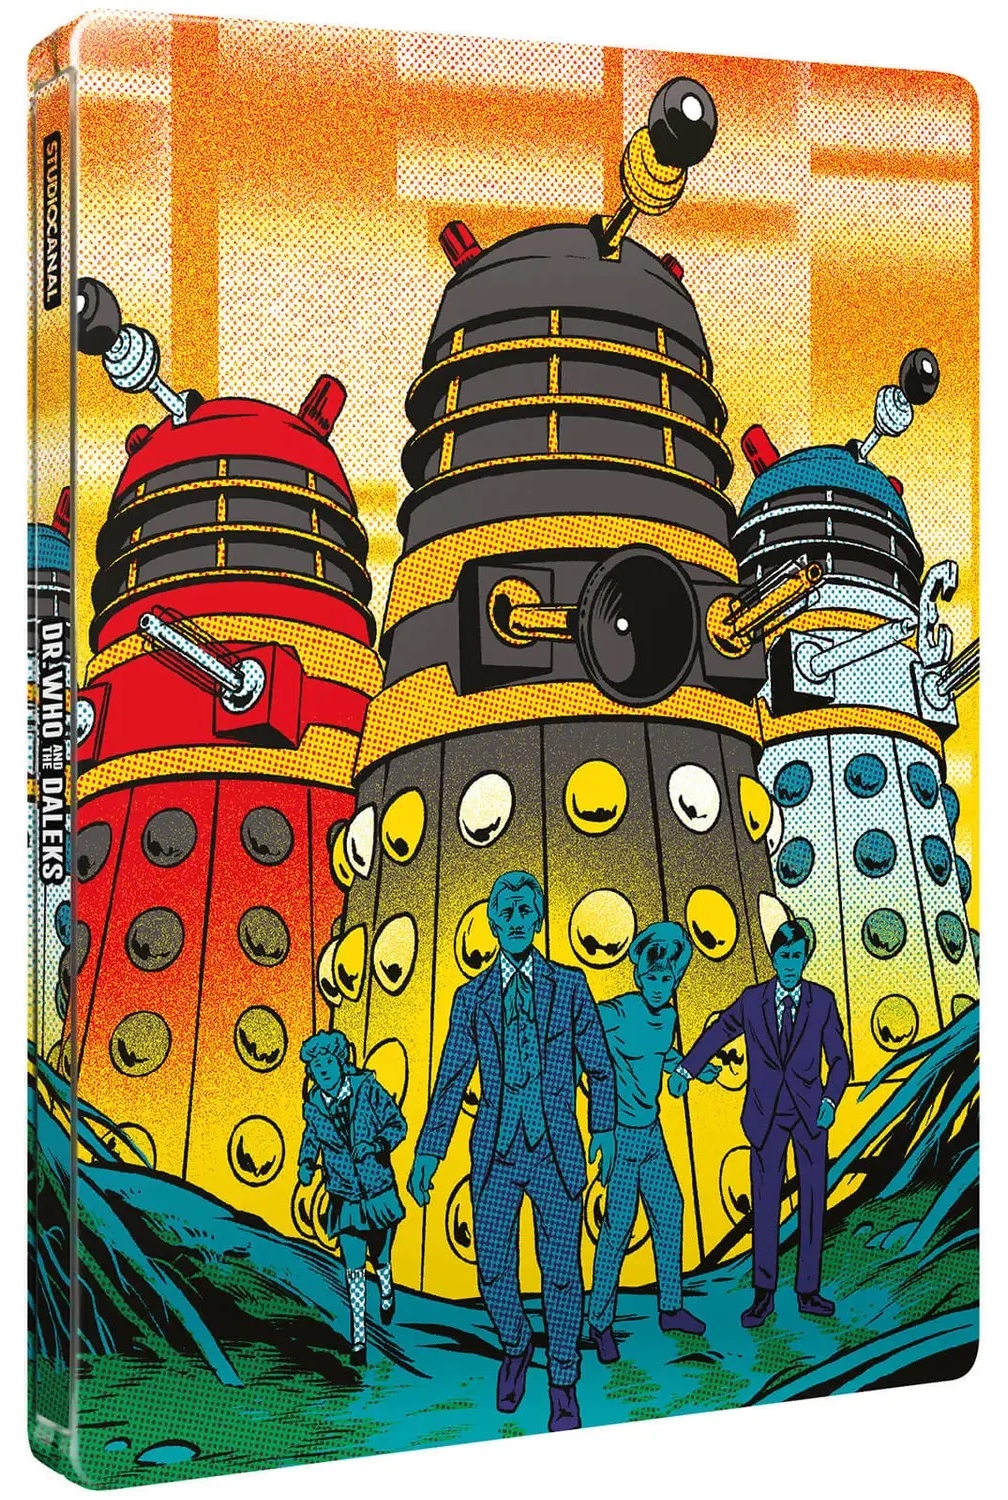 Dr-Who-and-the-Daleks-4K-SteelBook-3